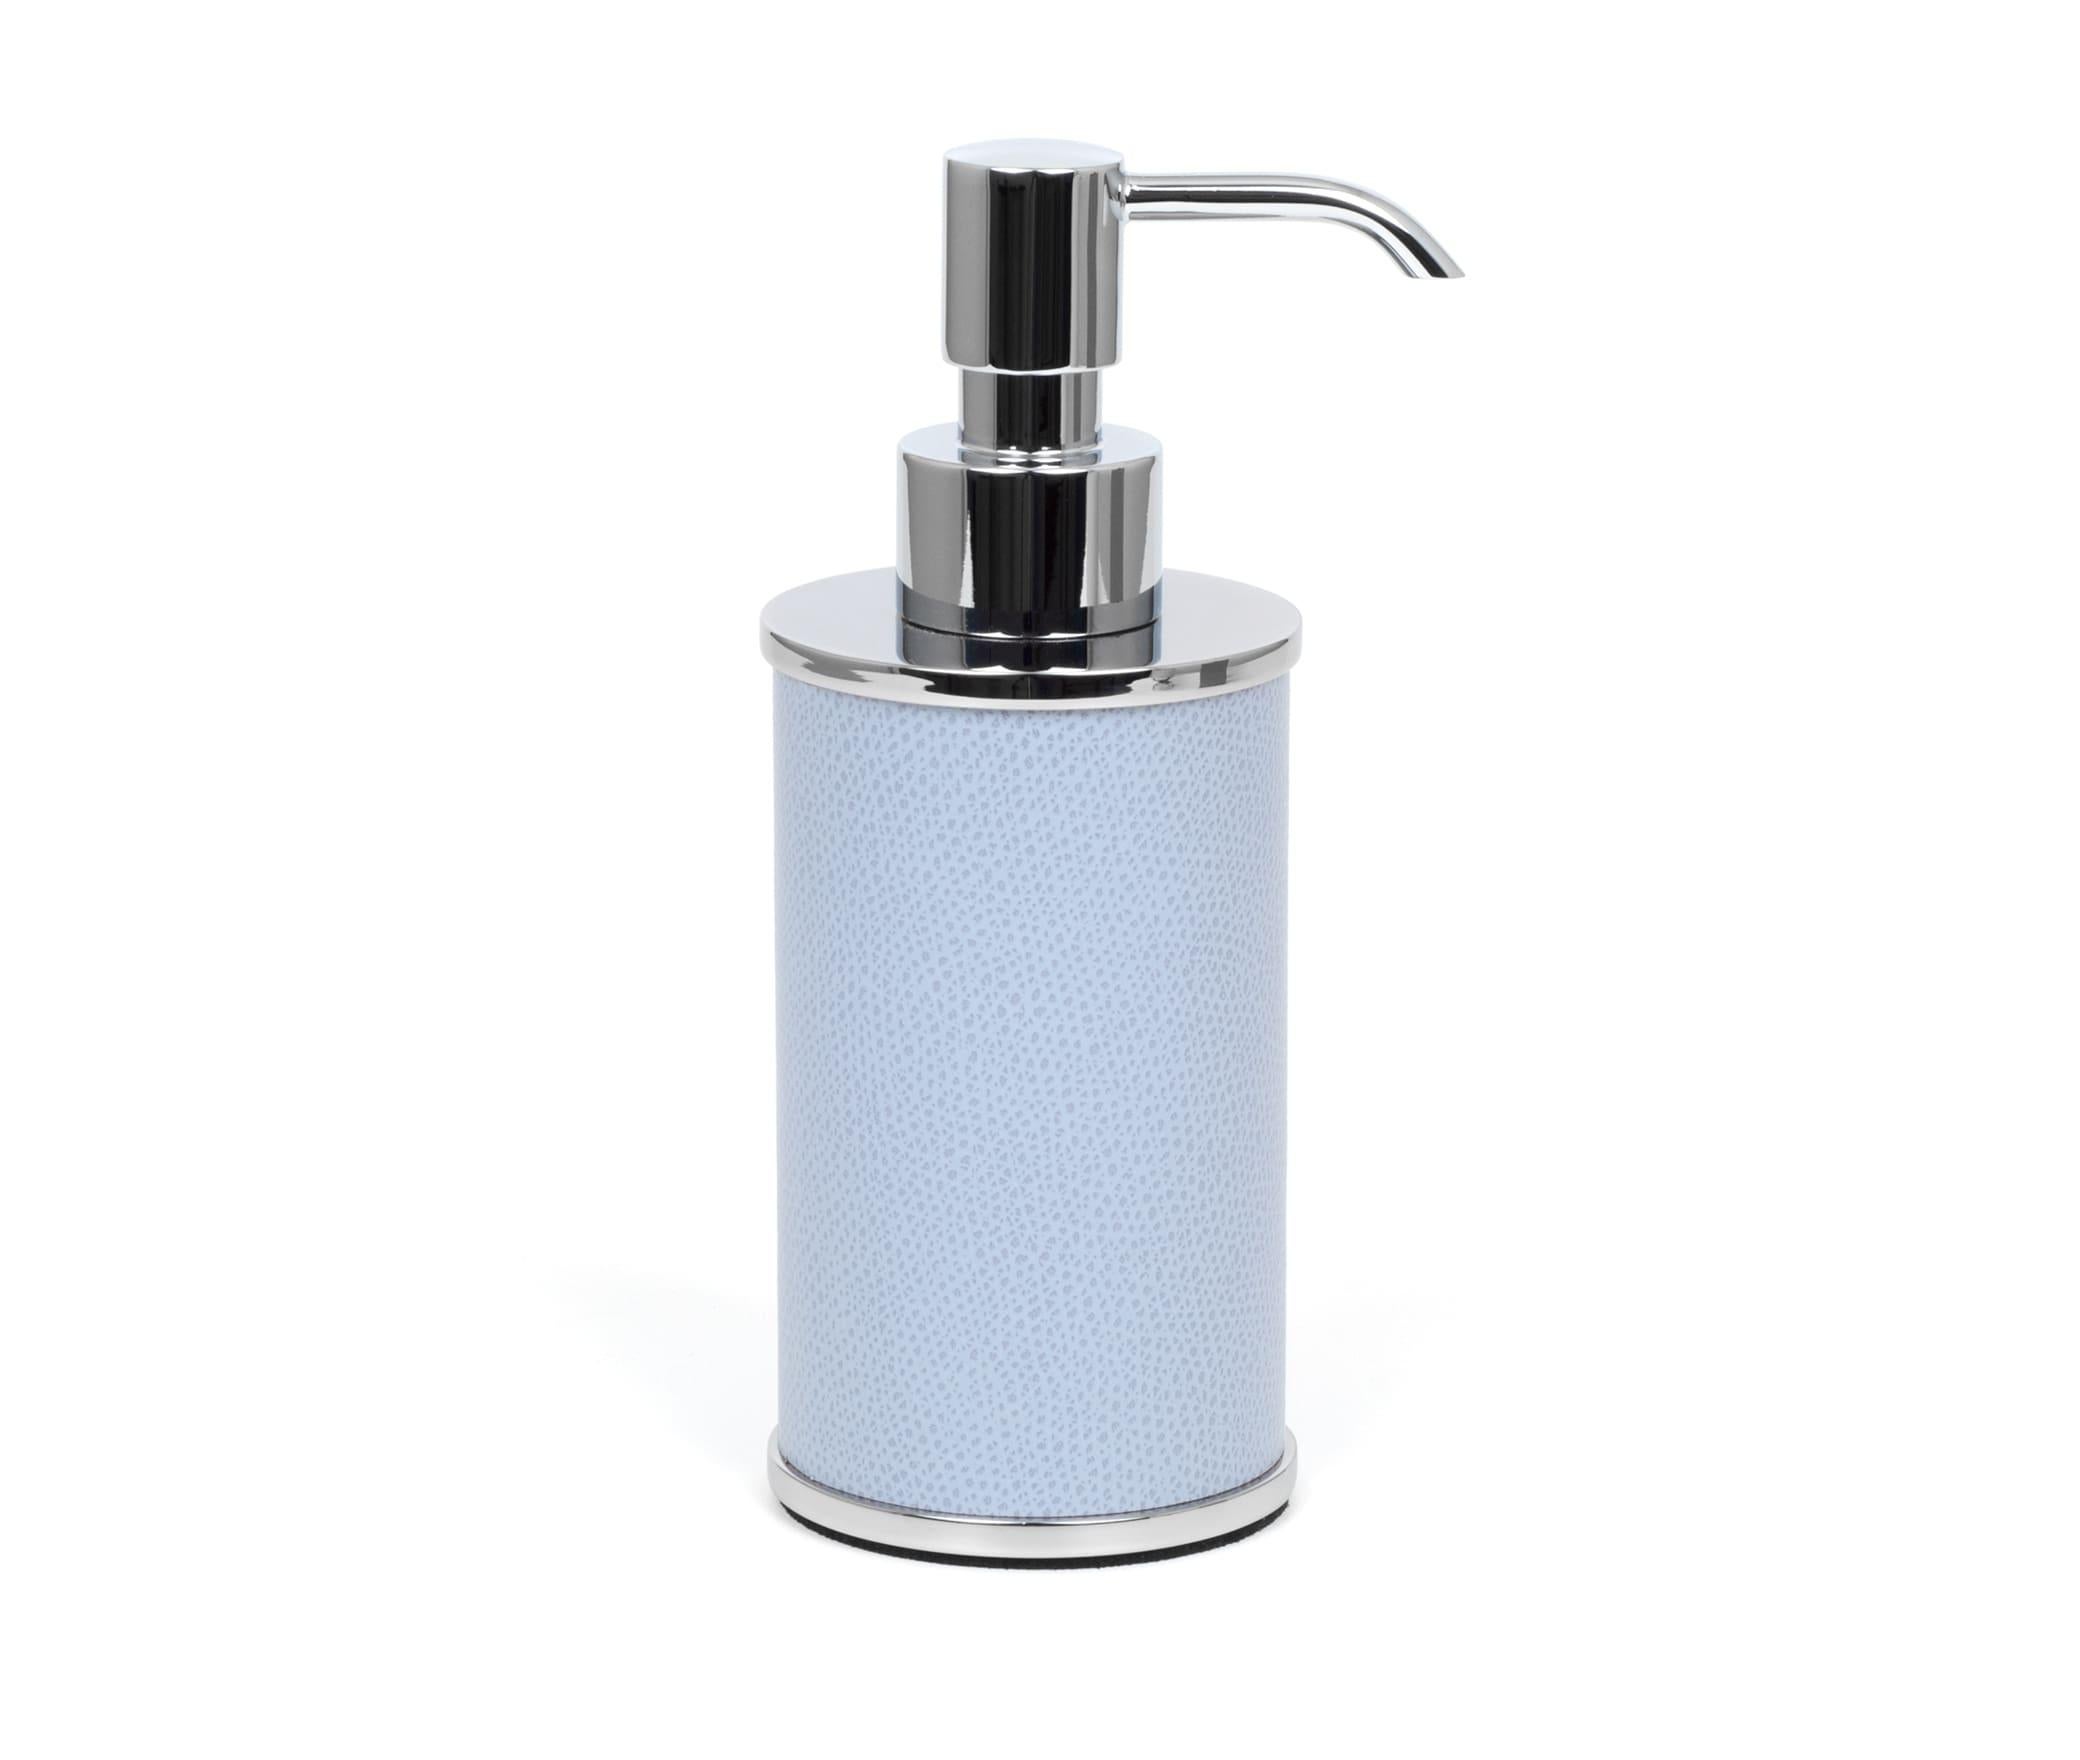 Olimpia, in all its beauty.

Our small tray, together with a soap dispenser and a toothbrush holder. A complete set with all the bathroom essentials presented here in a round shape. Clean, crisp lines with perfect accents made in chrome, gold and